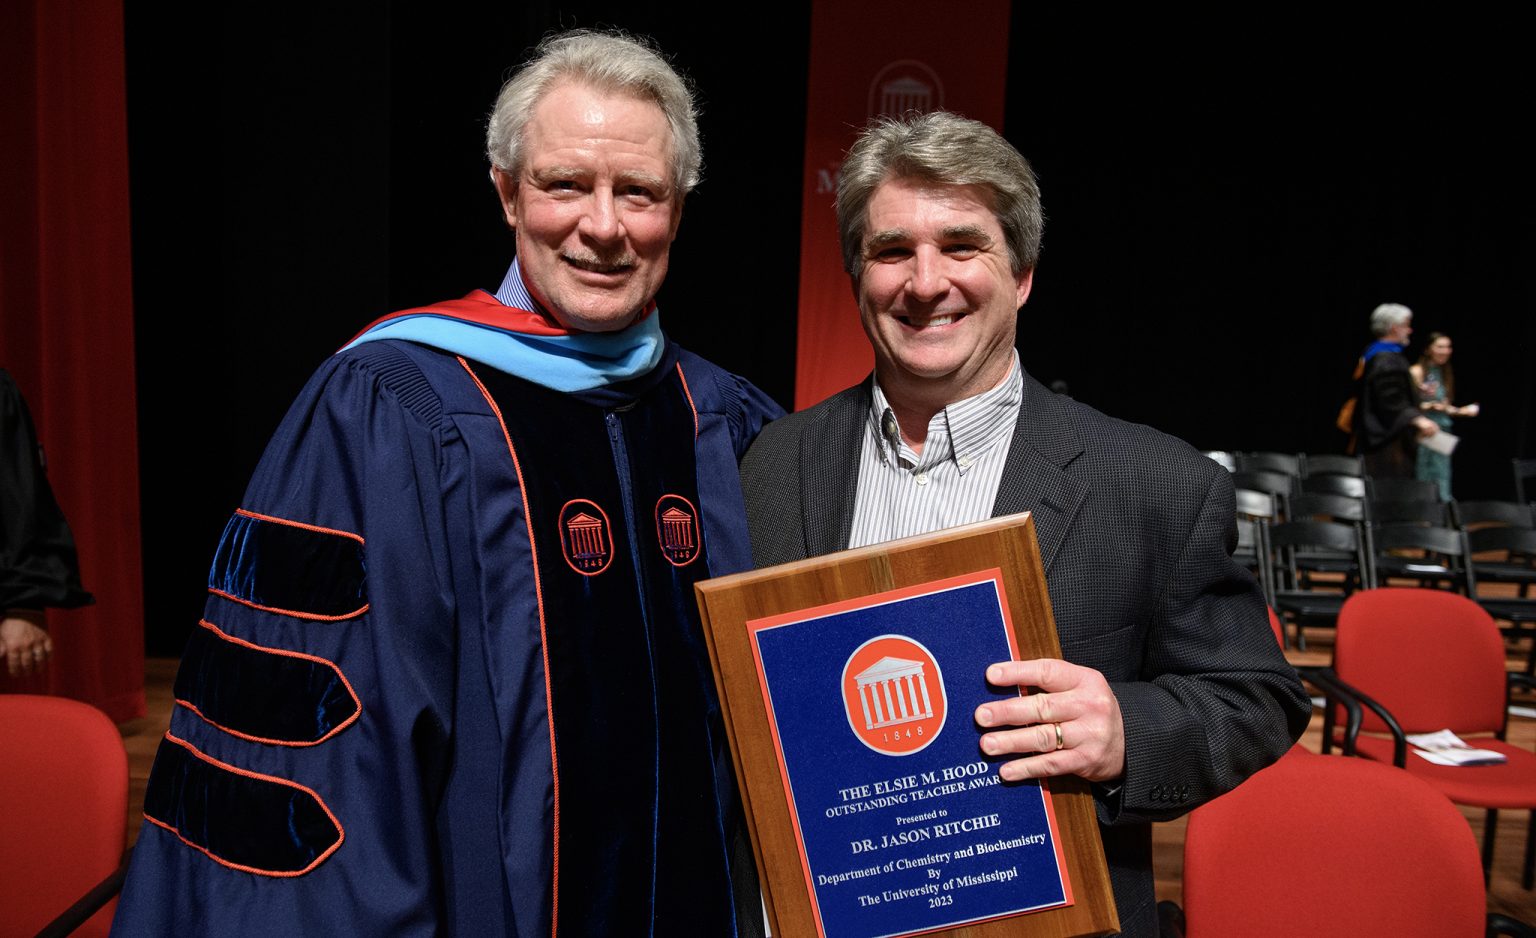 Chancellor Glenn Boyce (left) congratulates Jason Ritchie, associate professor of chemistry and biochemistry, as the 2023 recipient of the Elsie M. Hood Outstanding Teacher Award at the university’s Honors Day Convocation. Photo by Thomas Graning/Ole Miss Digital Imaging Services